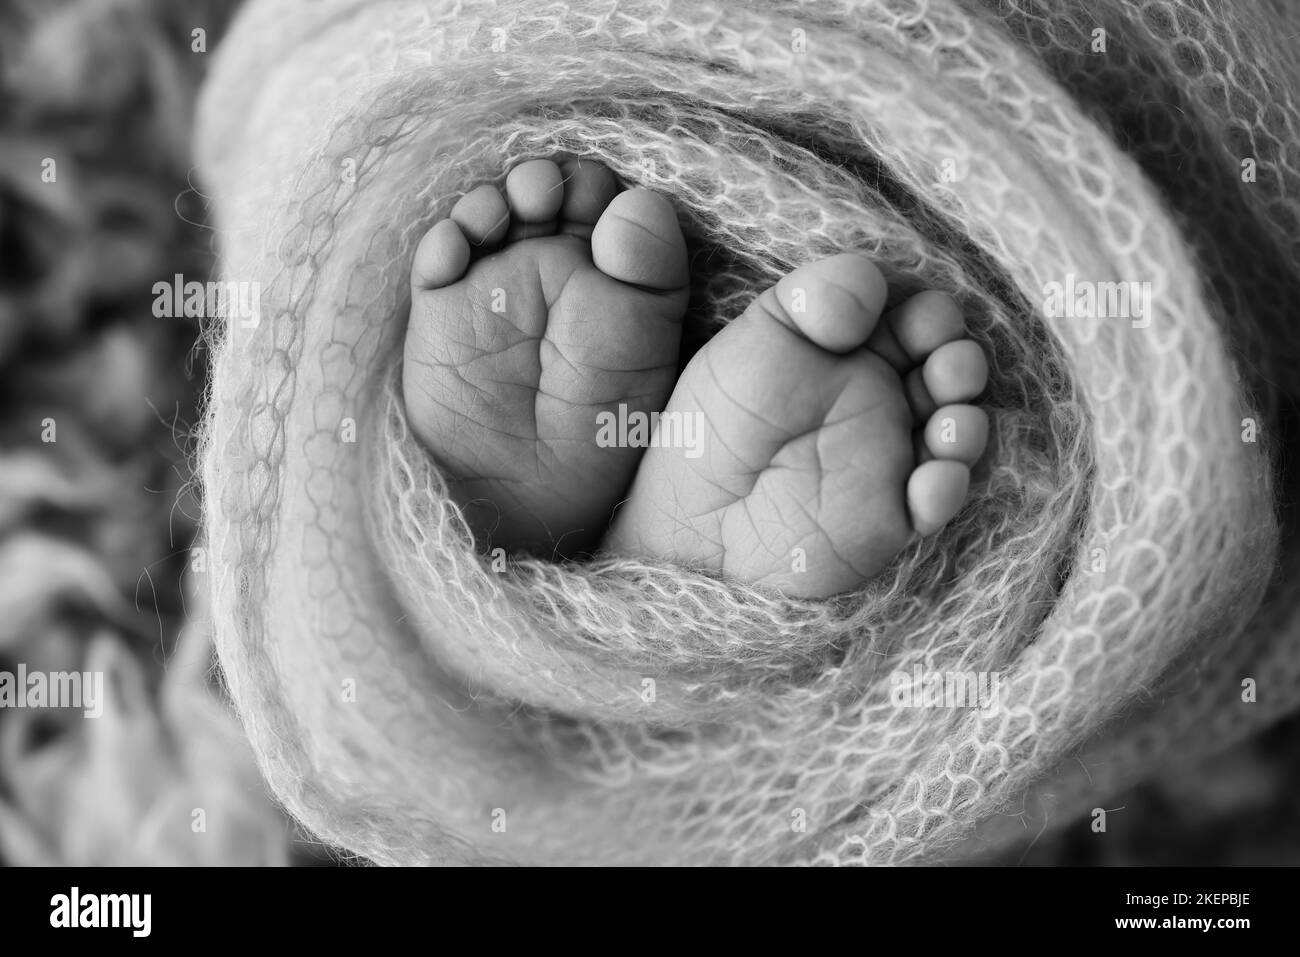 Soft feet of a newborn in a blanket Close-up of toes, heels and feet of a baby. Stock Photo